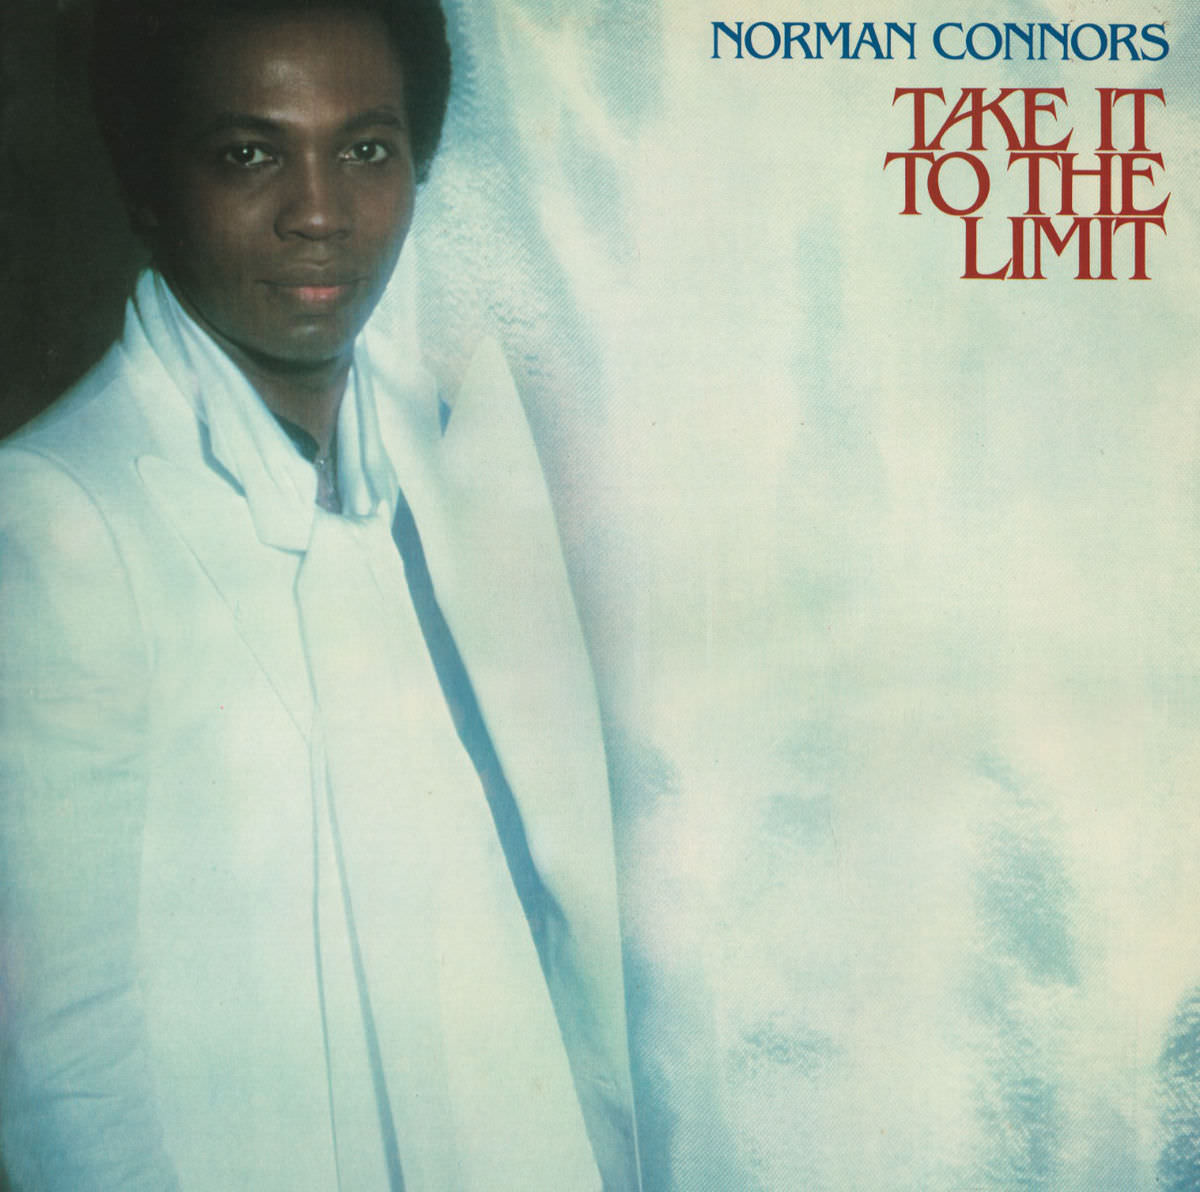 Norman Connors - Take It To The Limit (Expanded Edition) (1980/2015) [FLAC 24bit/96kHz]